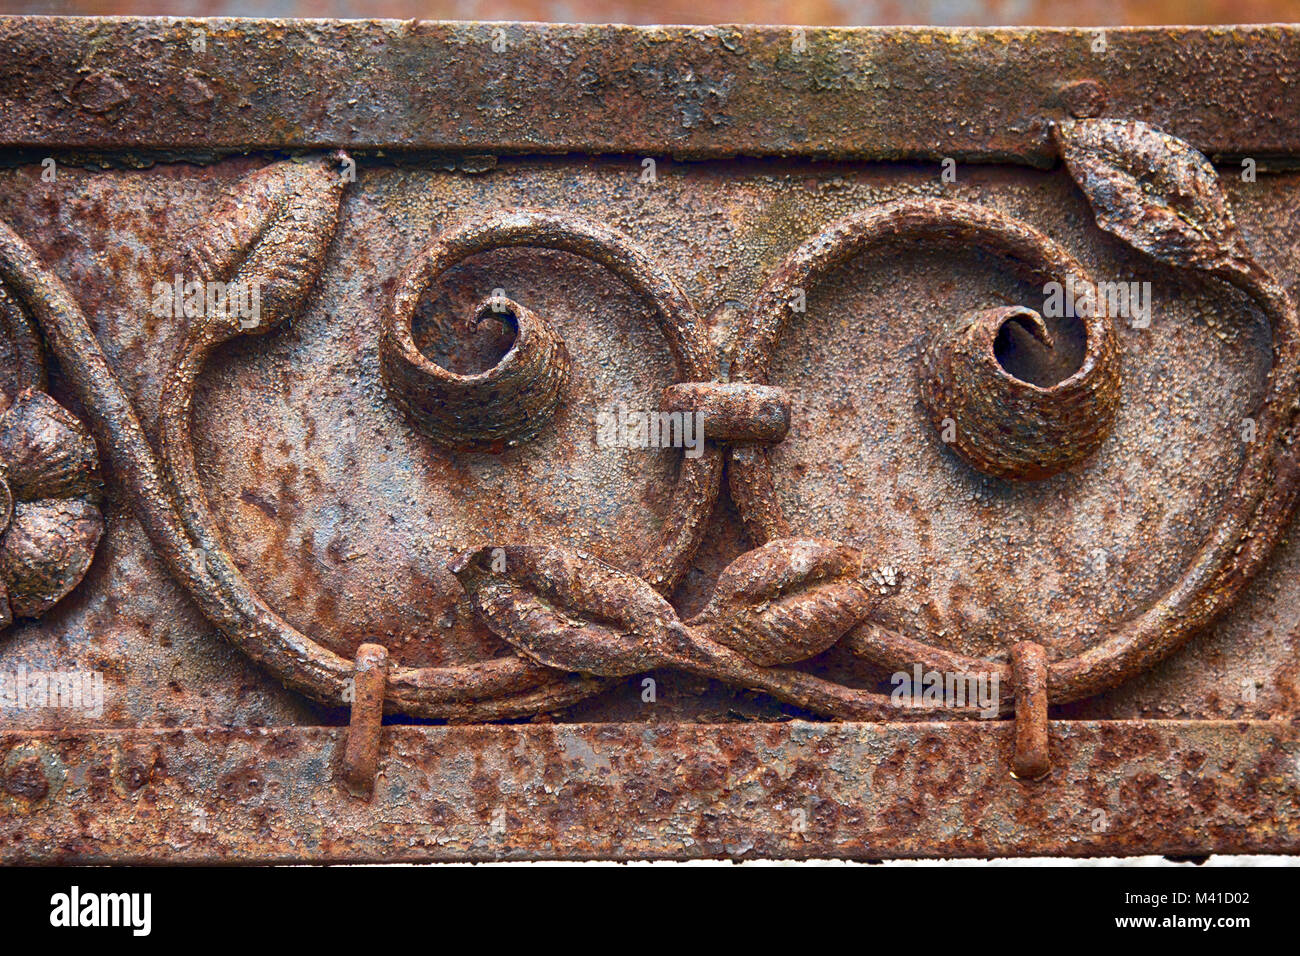 Everyday objects in the Museum and the abandoned old houses. Twisted Pattern (Arabesque) on the wrought iron gate. Old rusty metal, metal handicrafts Stock Photo